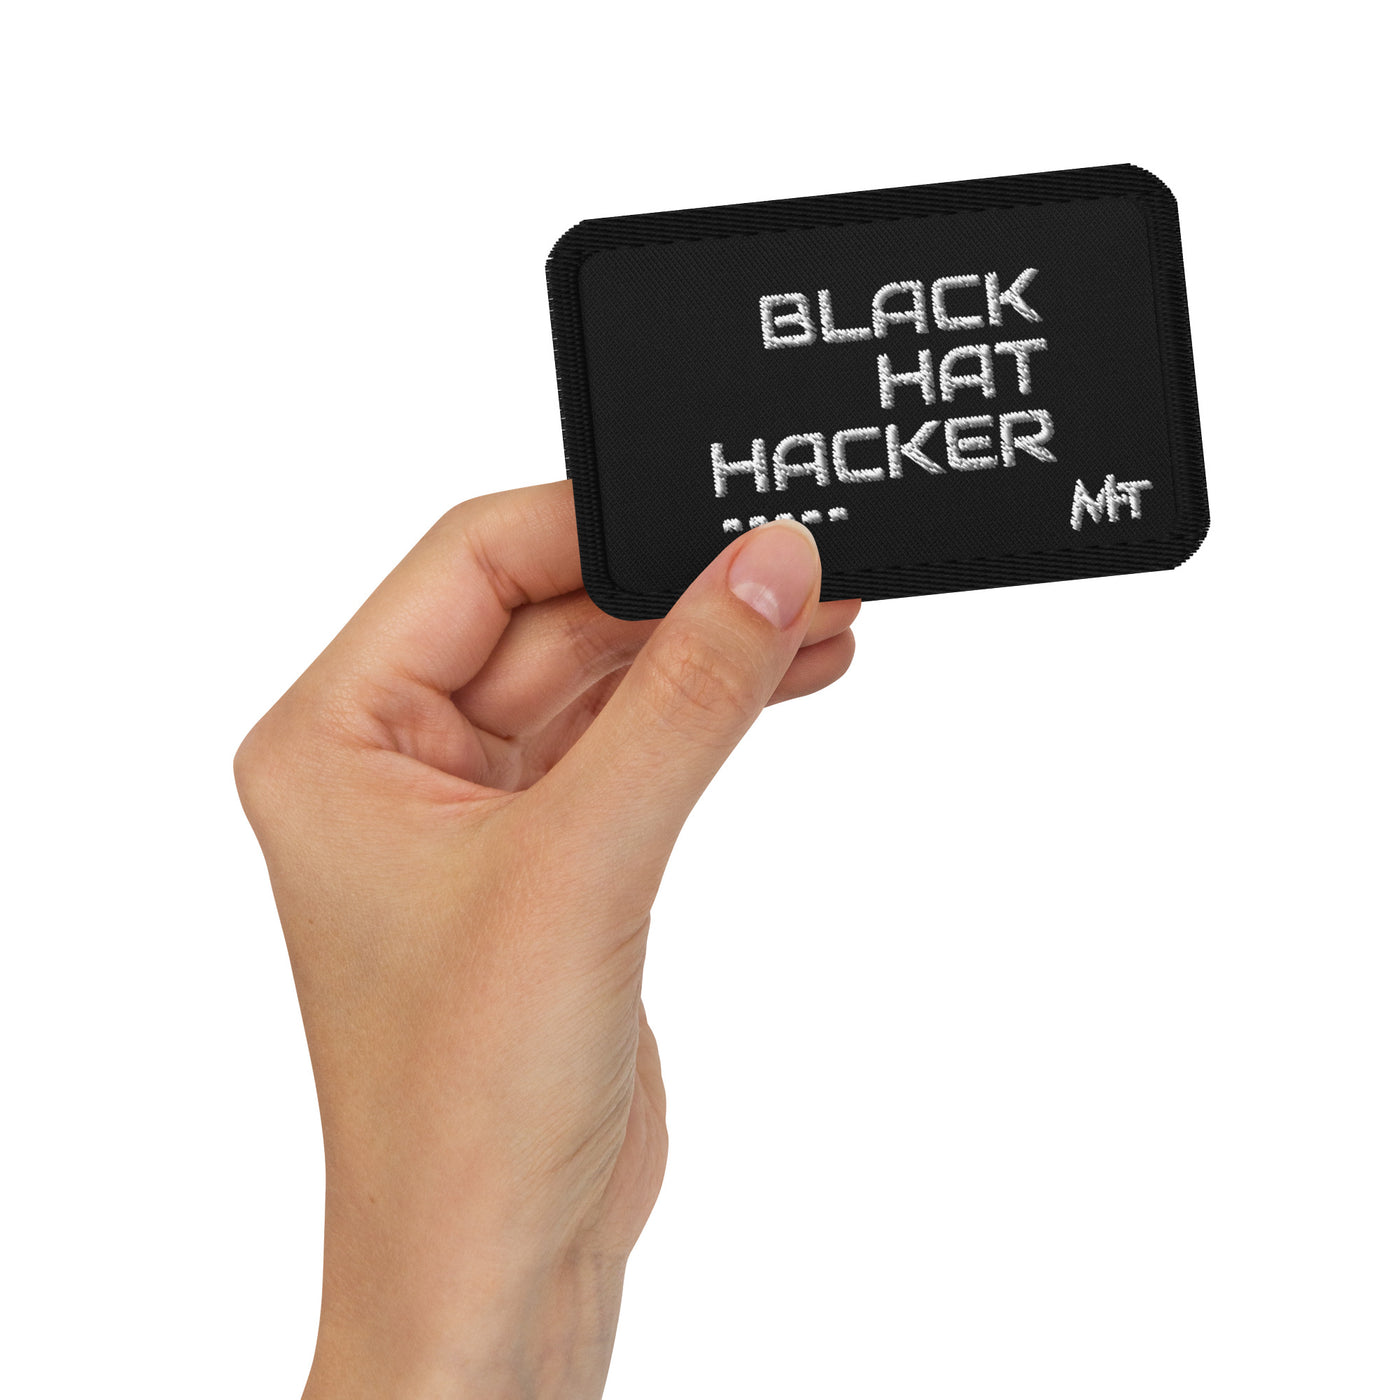 Black Hat Hacker V15 - Embroidered patches